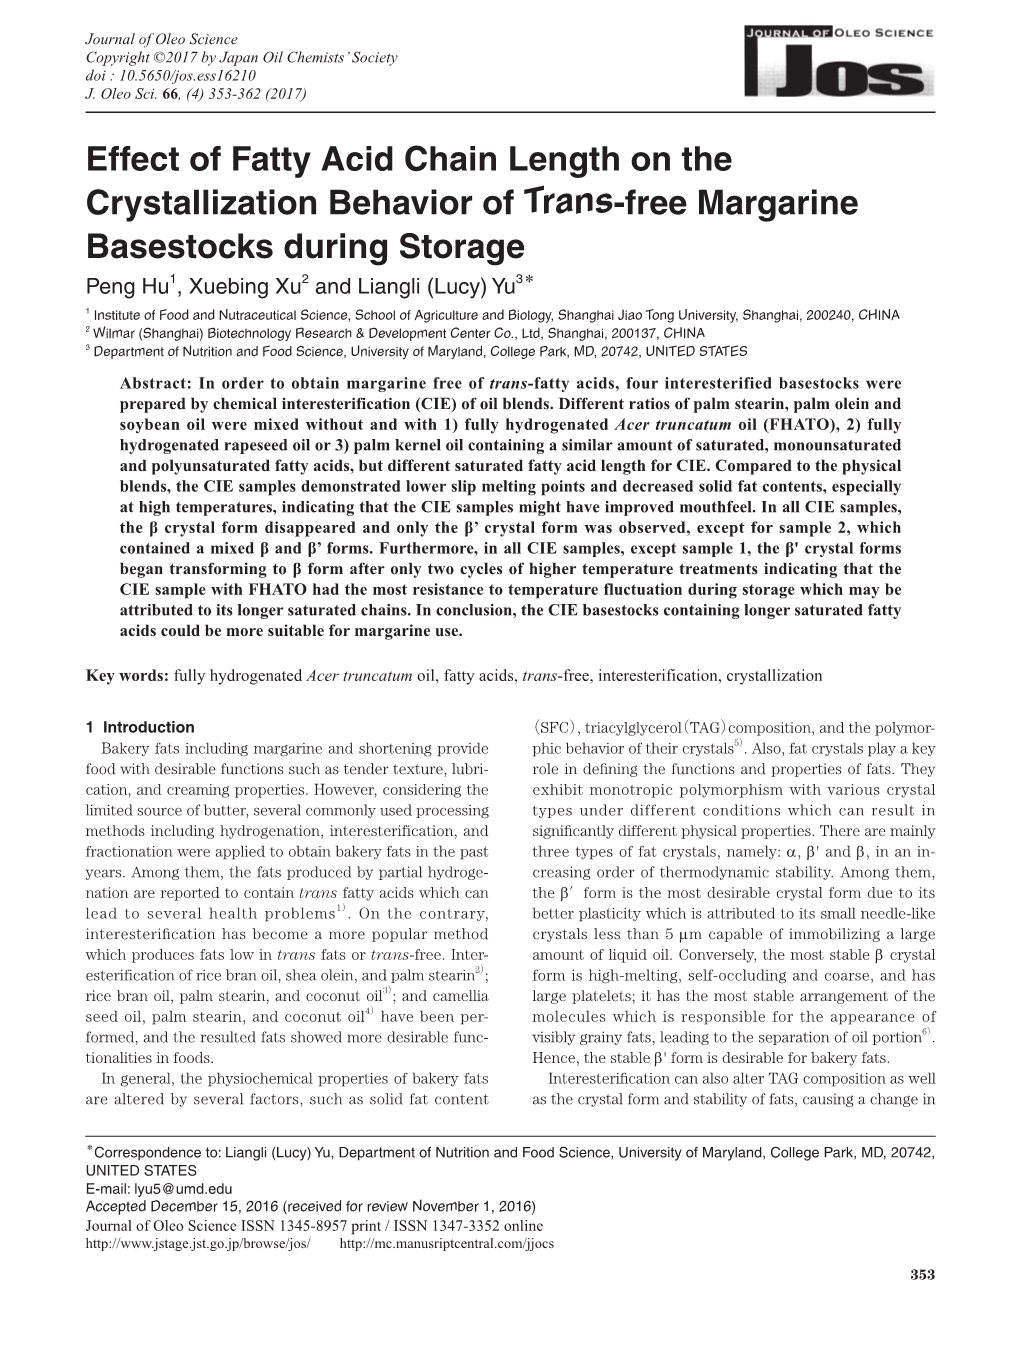 Effect of Fatty Acid Chain Length on the Crystallization Behavior Of